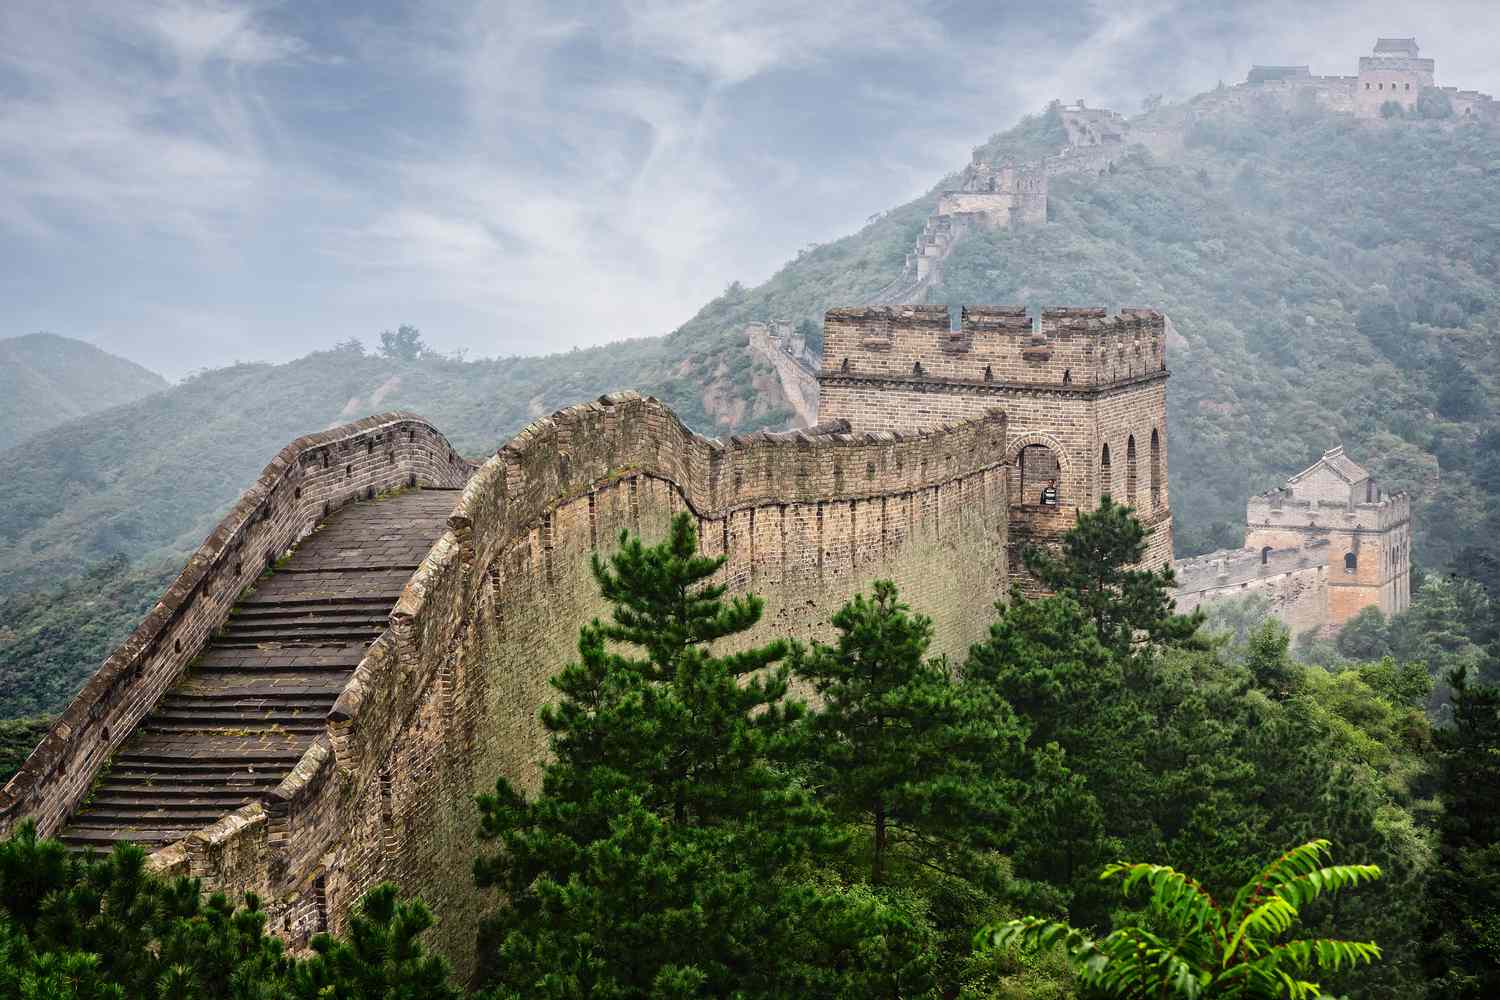 The Great Wall of China in Beijing